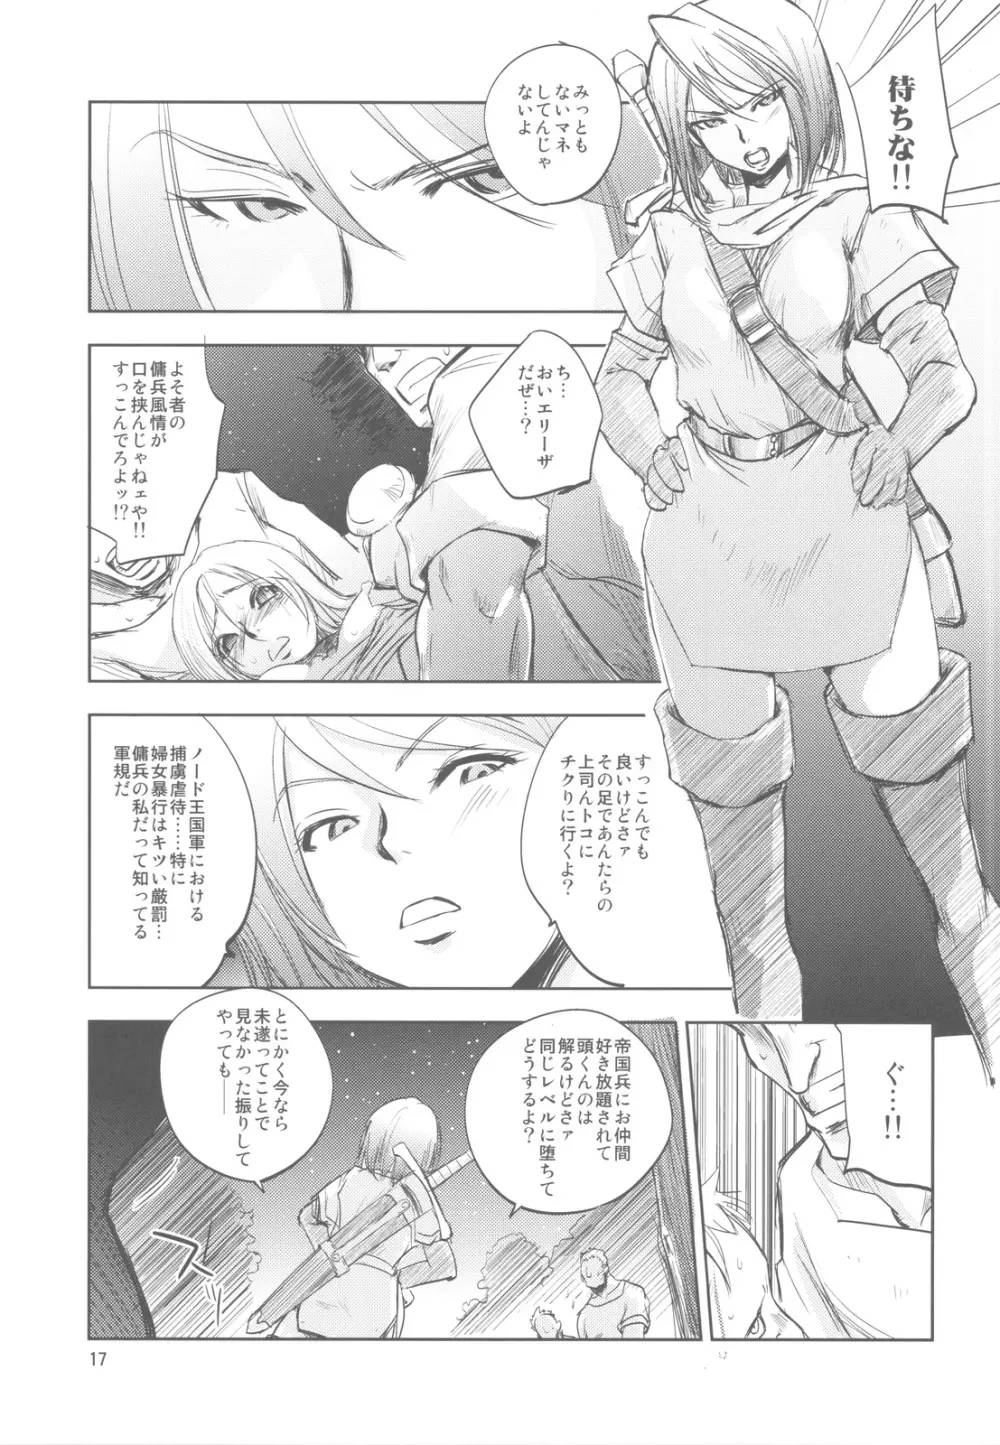 GRASSEN'S WAR ANOTHER STORY Ex #01 ノード侵攻 I - page16